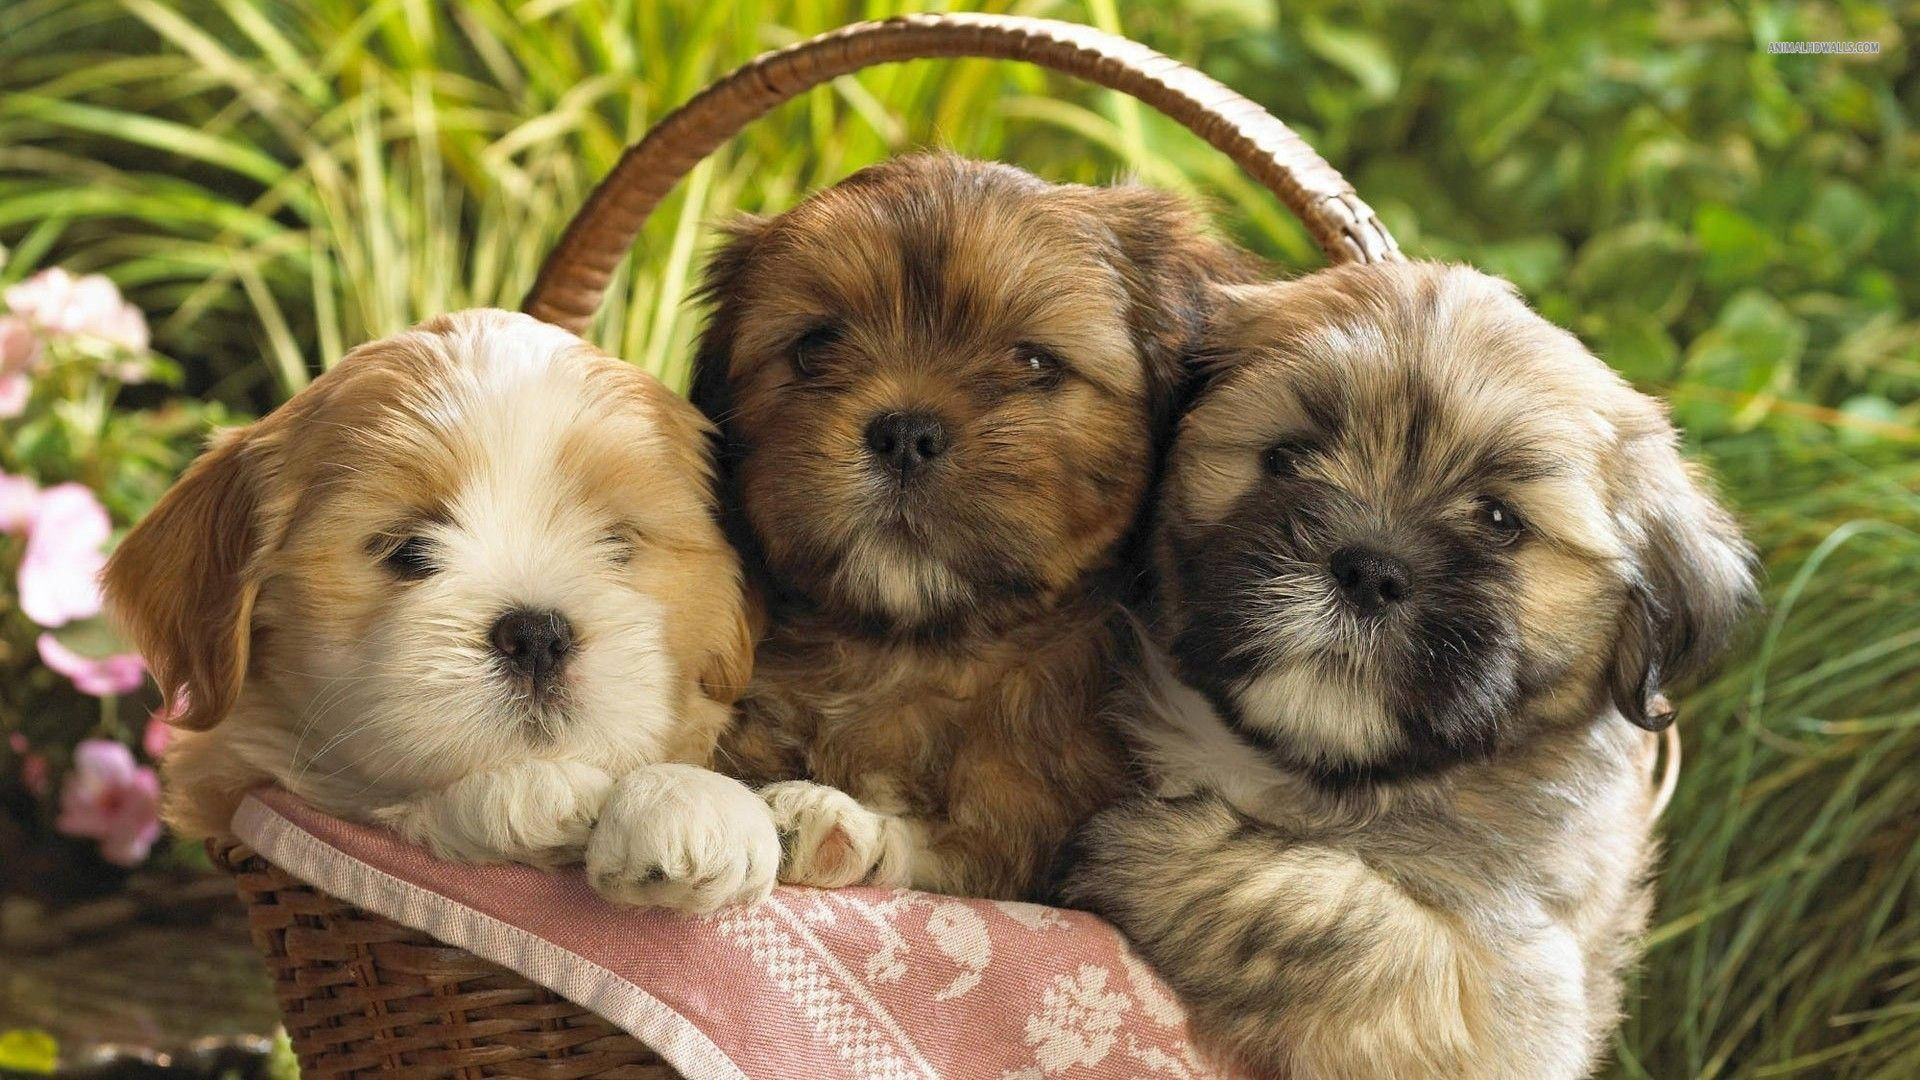 Puppy Dogs In Picnic Basket Wallpaper